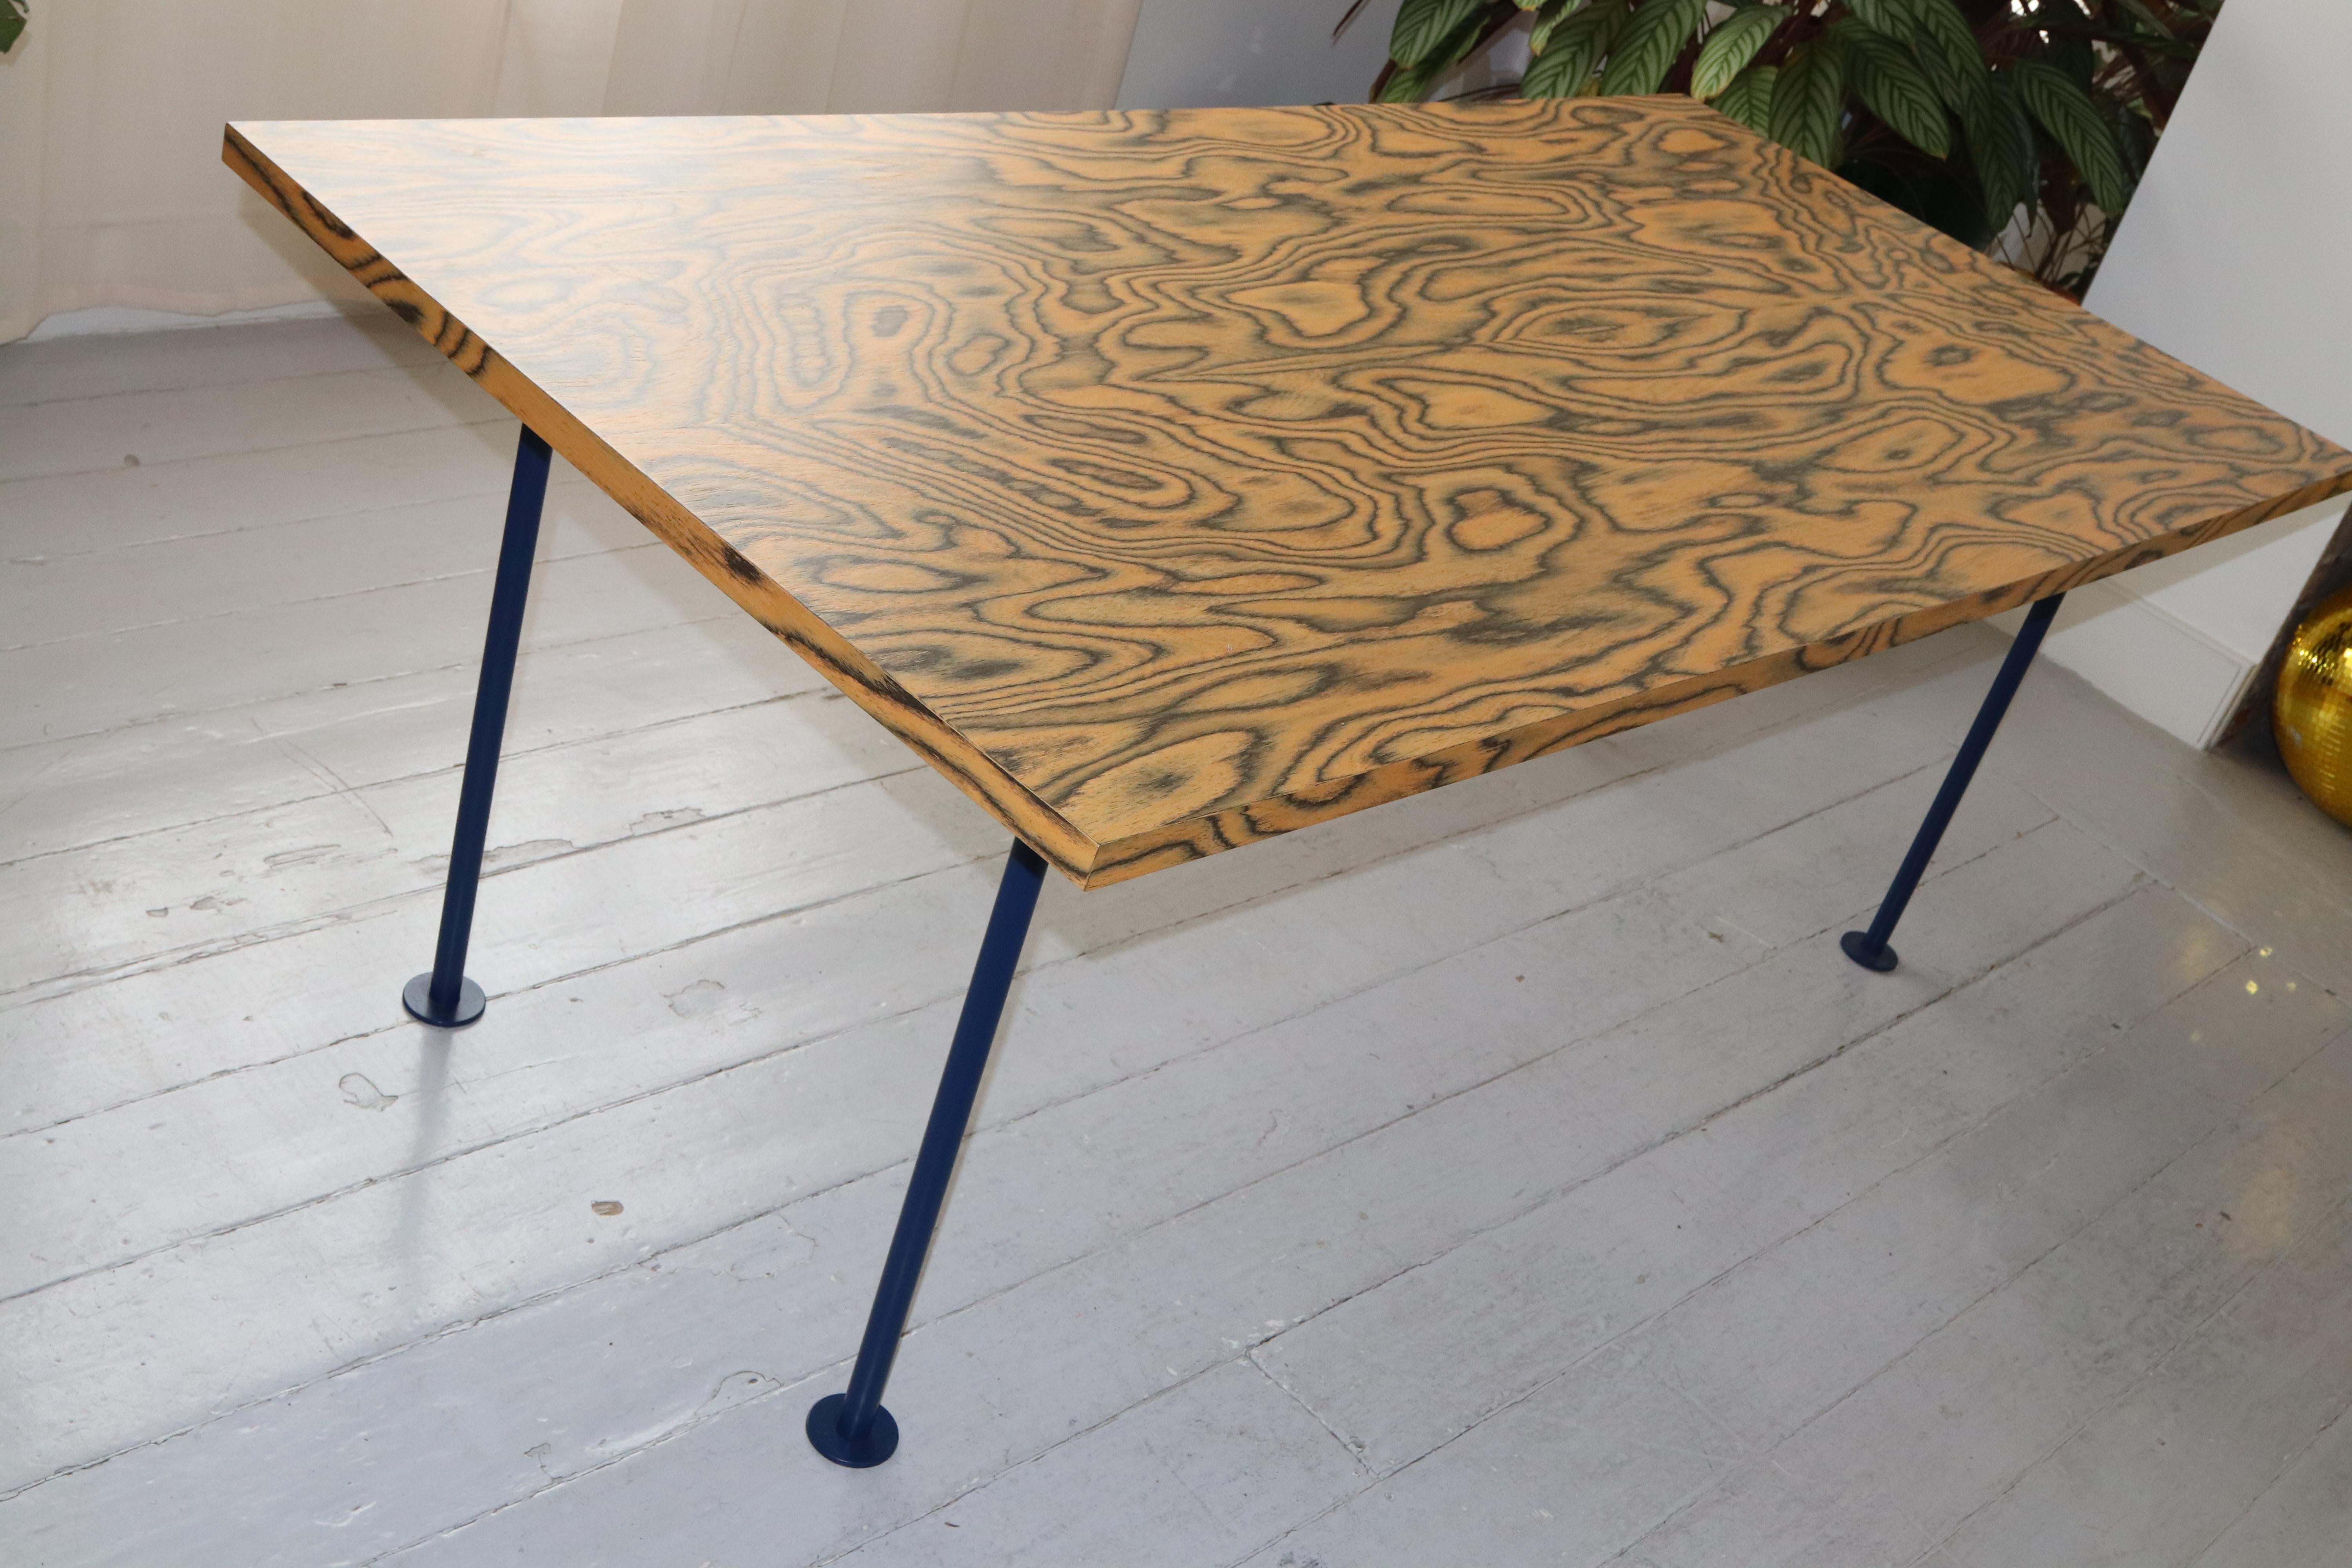 Contemporary MEGABABELAND animal print pattern dining table, 2020 For Sale